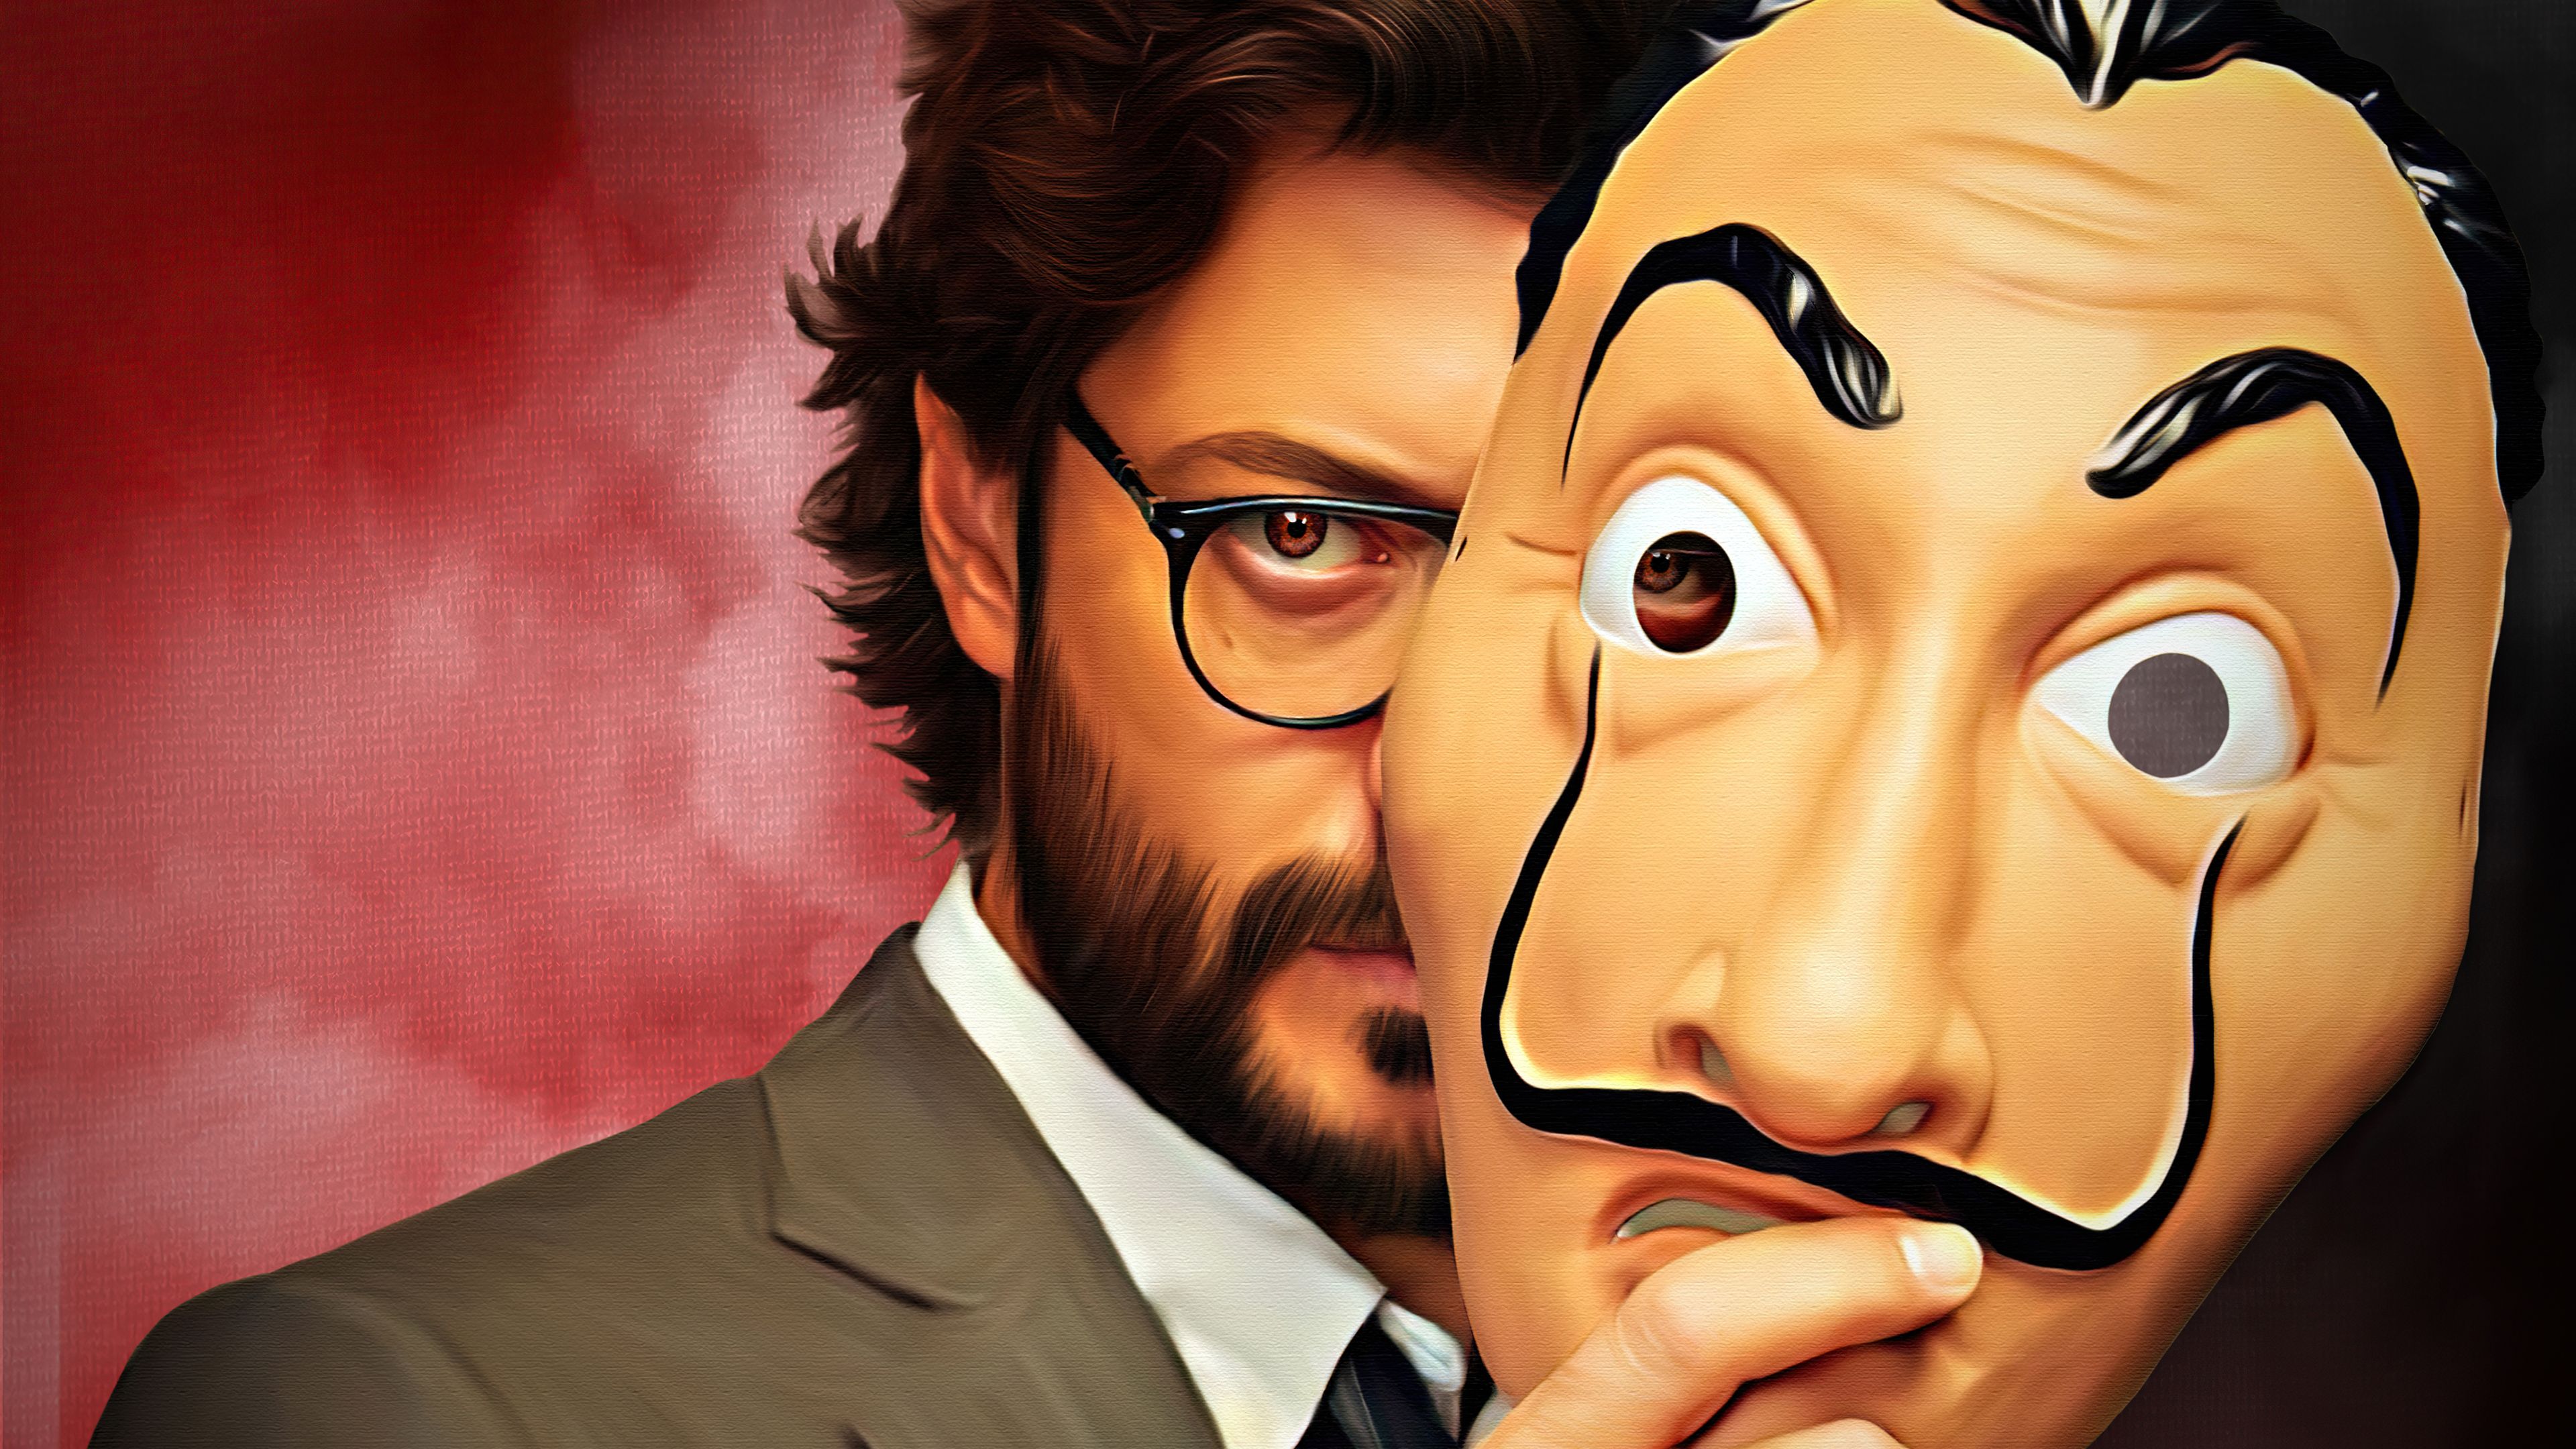 The Professor Digital Painting Money Heist, HD Tv Shows, 4k Wallpaper, Image, Background, Photo and Picture